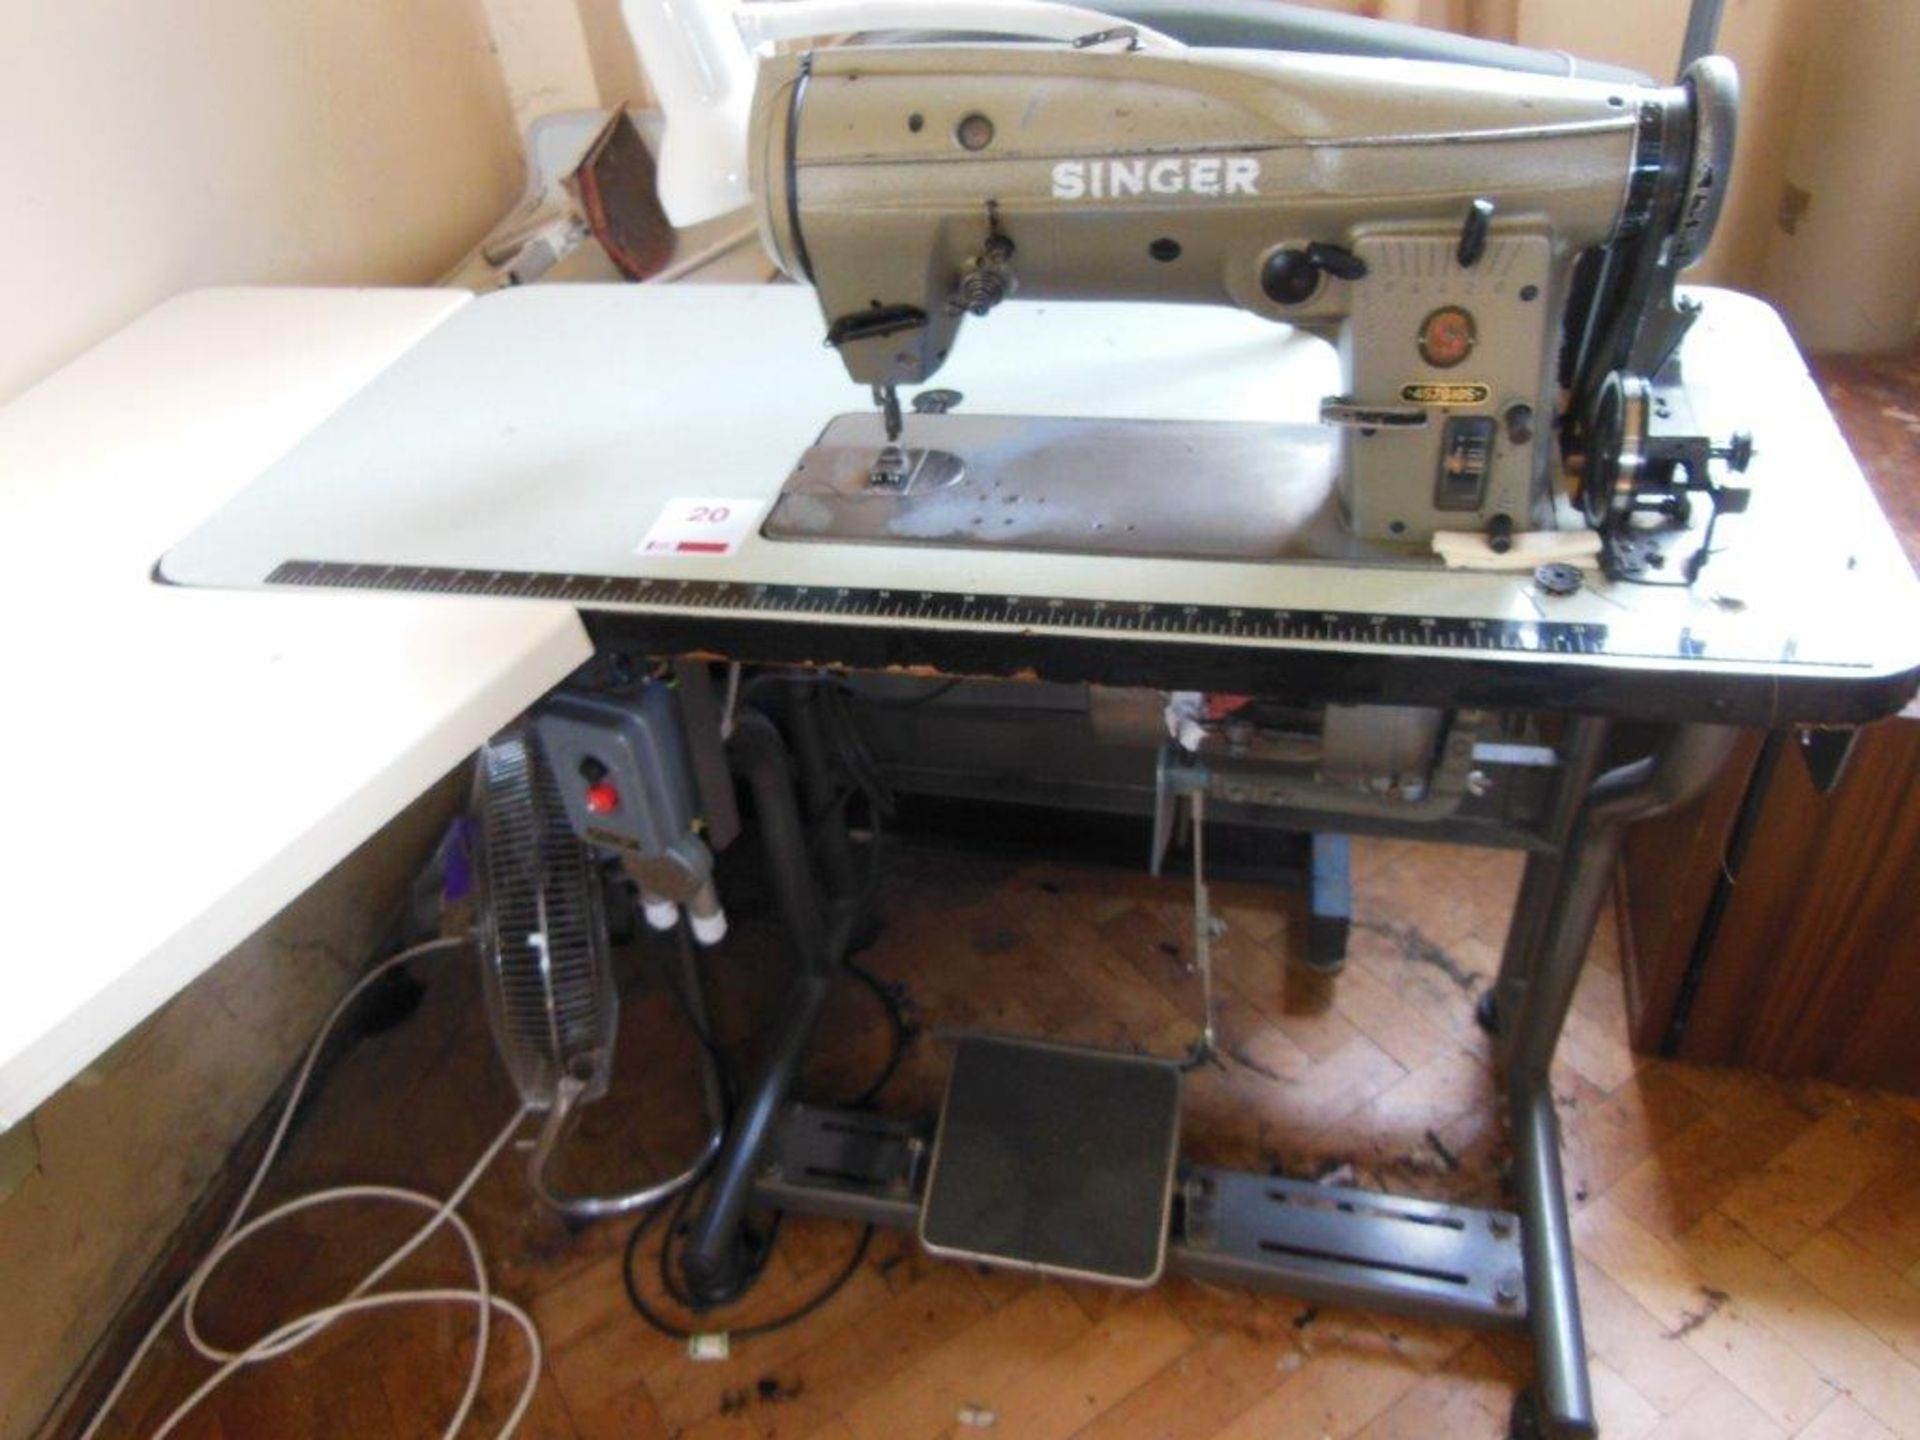 Singer 457G105 zig zag industrial sewing machine, three phase. NB: this item has no CE marking. The